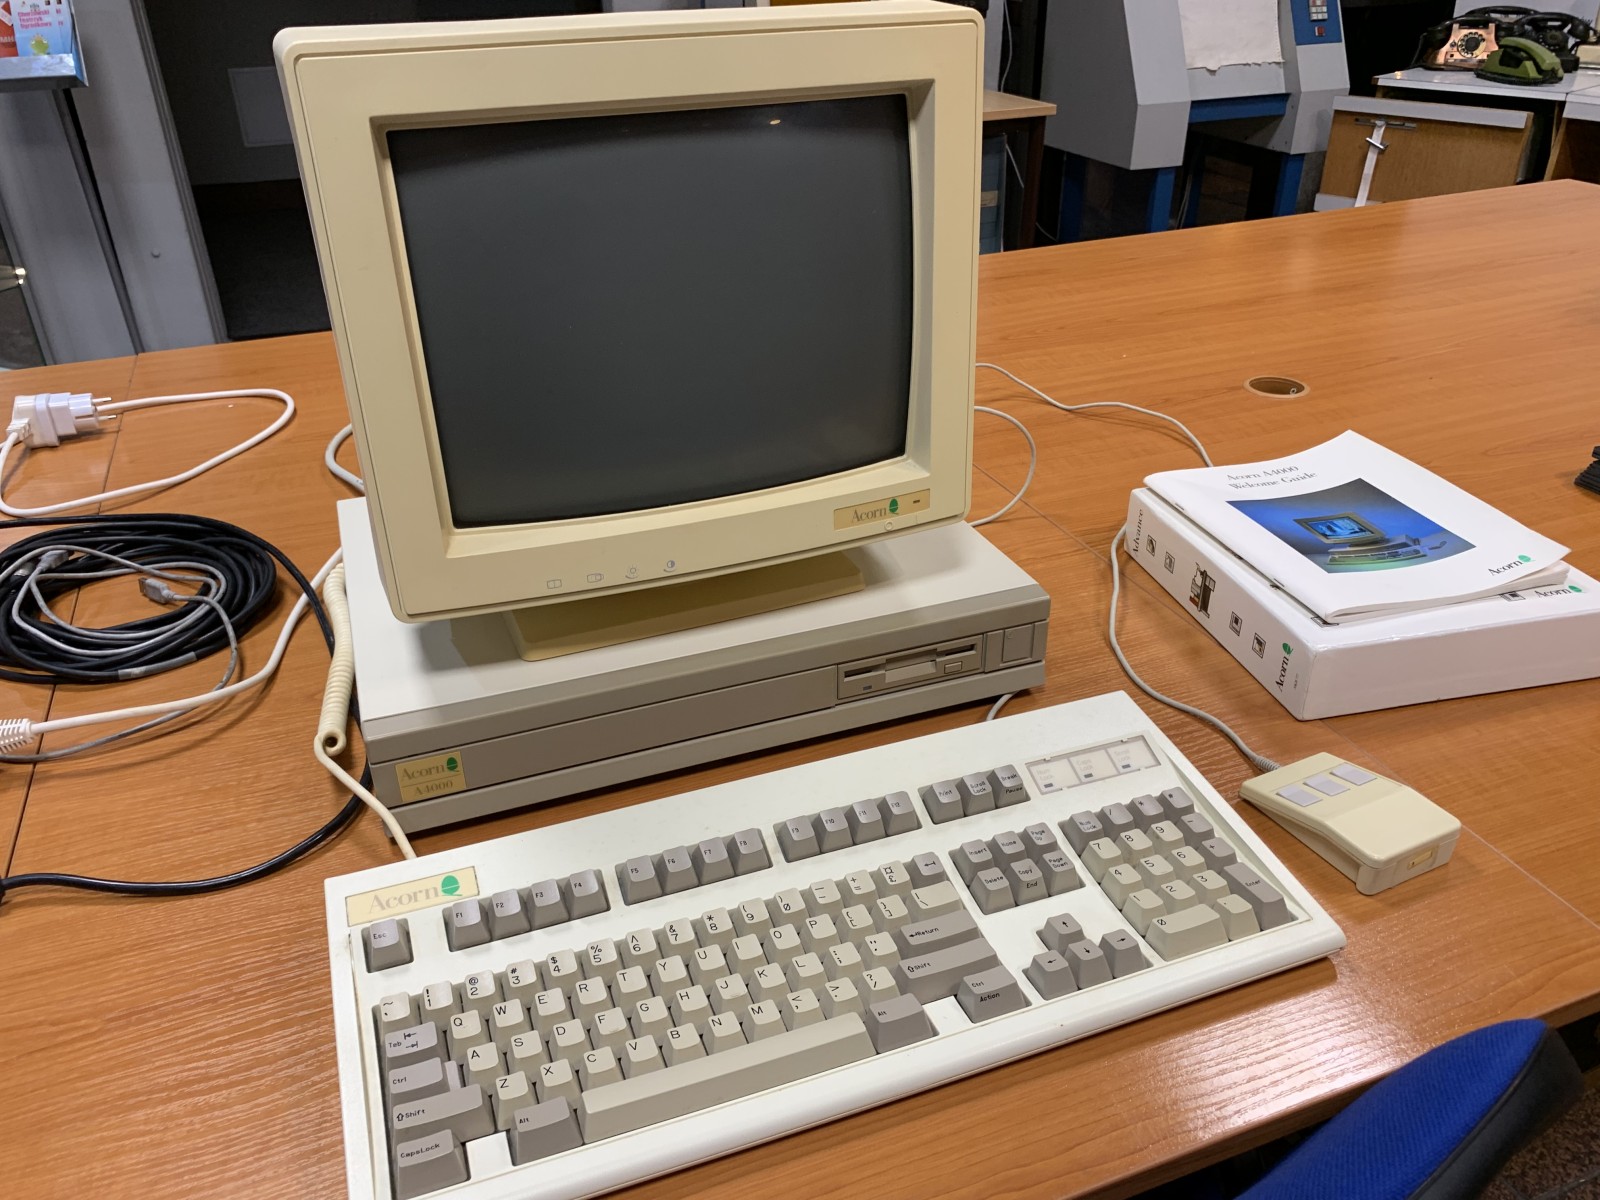 Acorn Archimedes A 4000